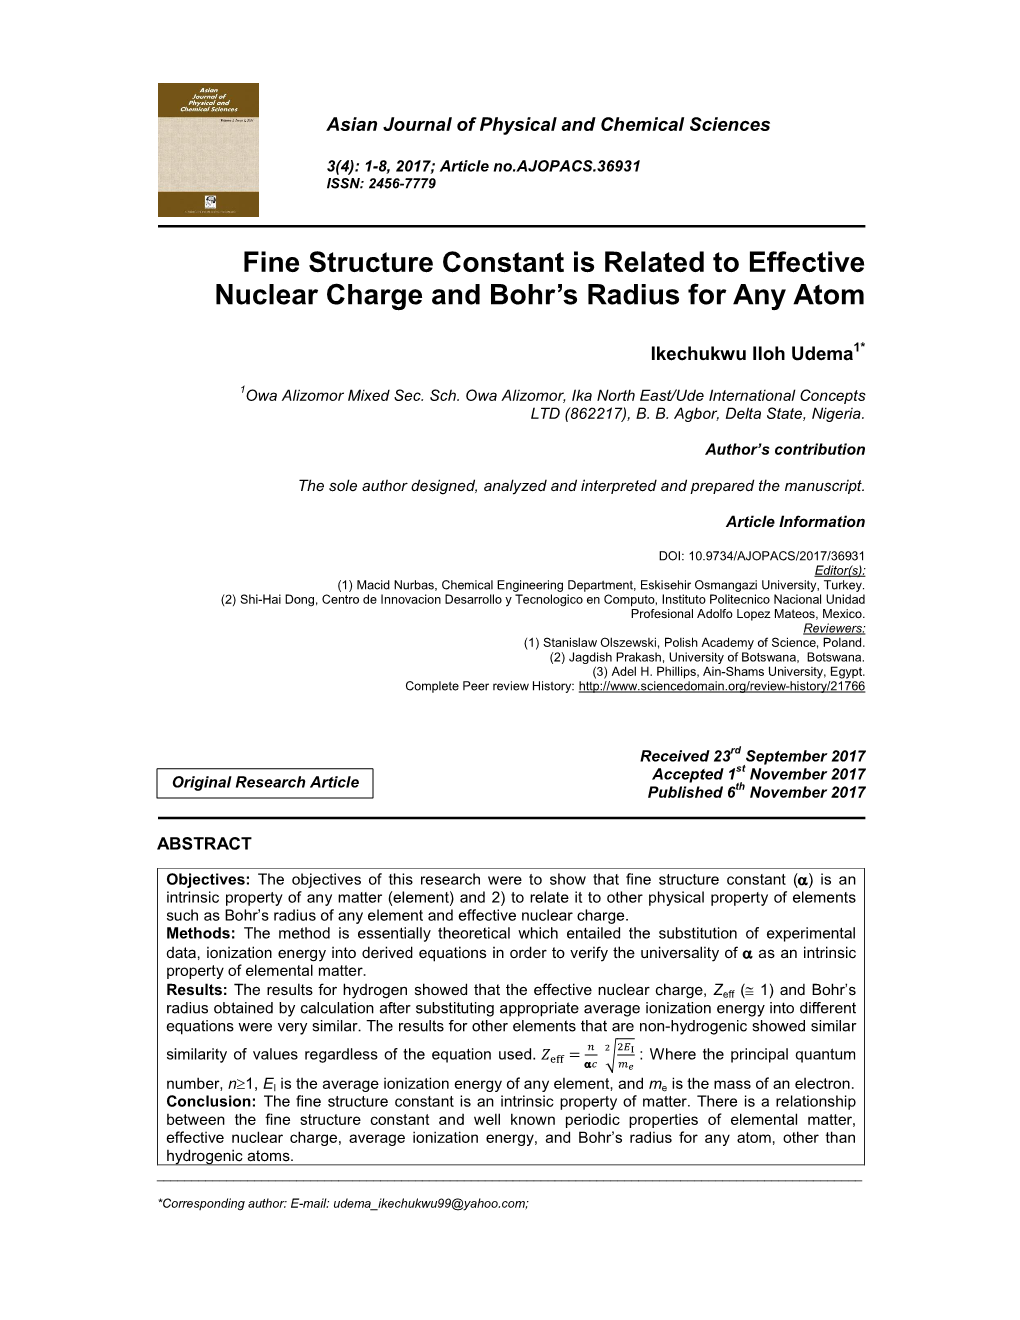 Fine Structure Constant Is Related to Effective Nuclear Charge and Bohr’S Radius for Any Atom